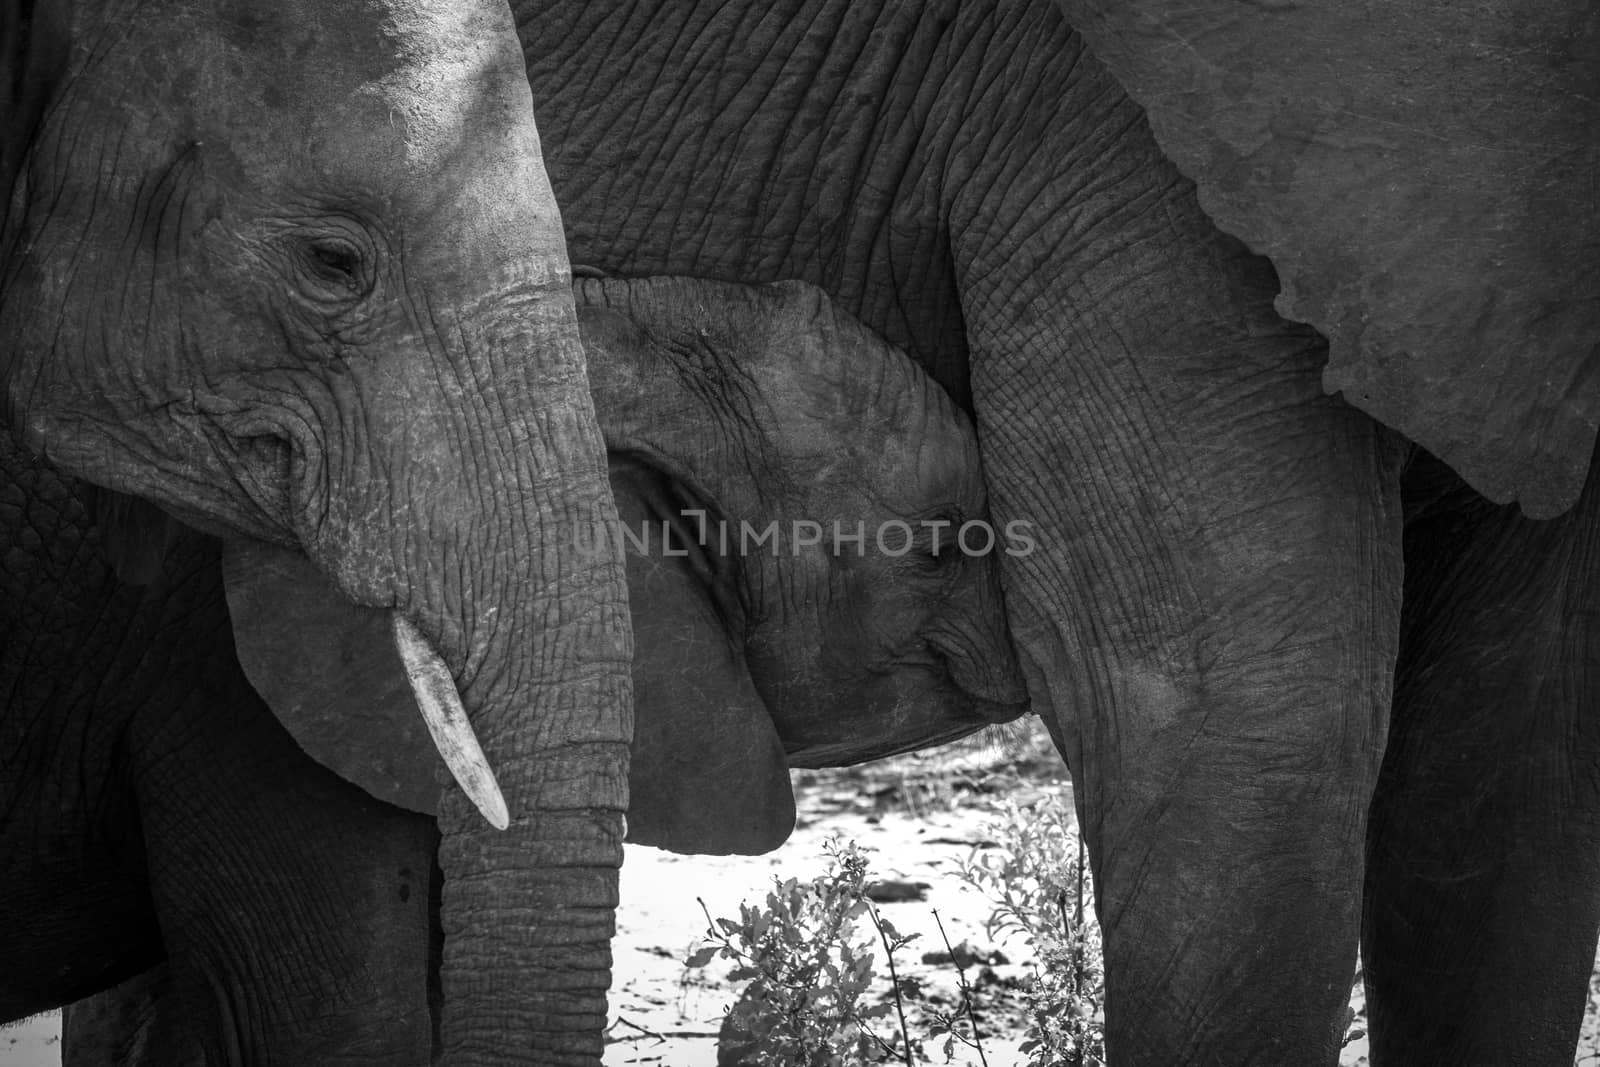 Baby Elephant suckling in black and white in the Kruger National Park, South Africa.